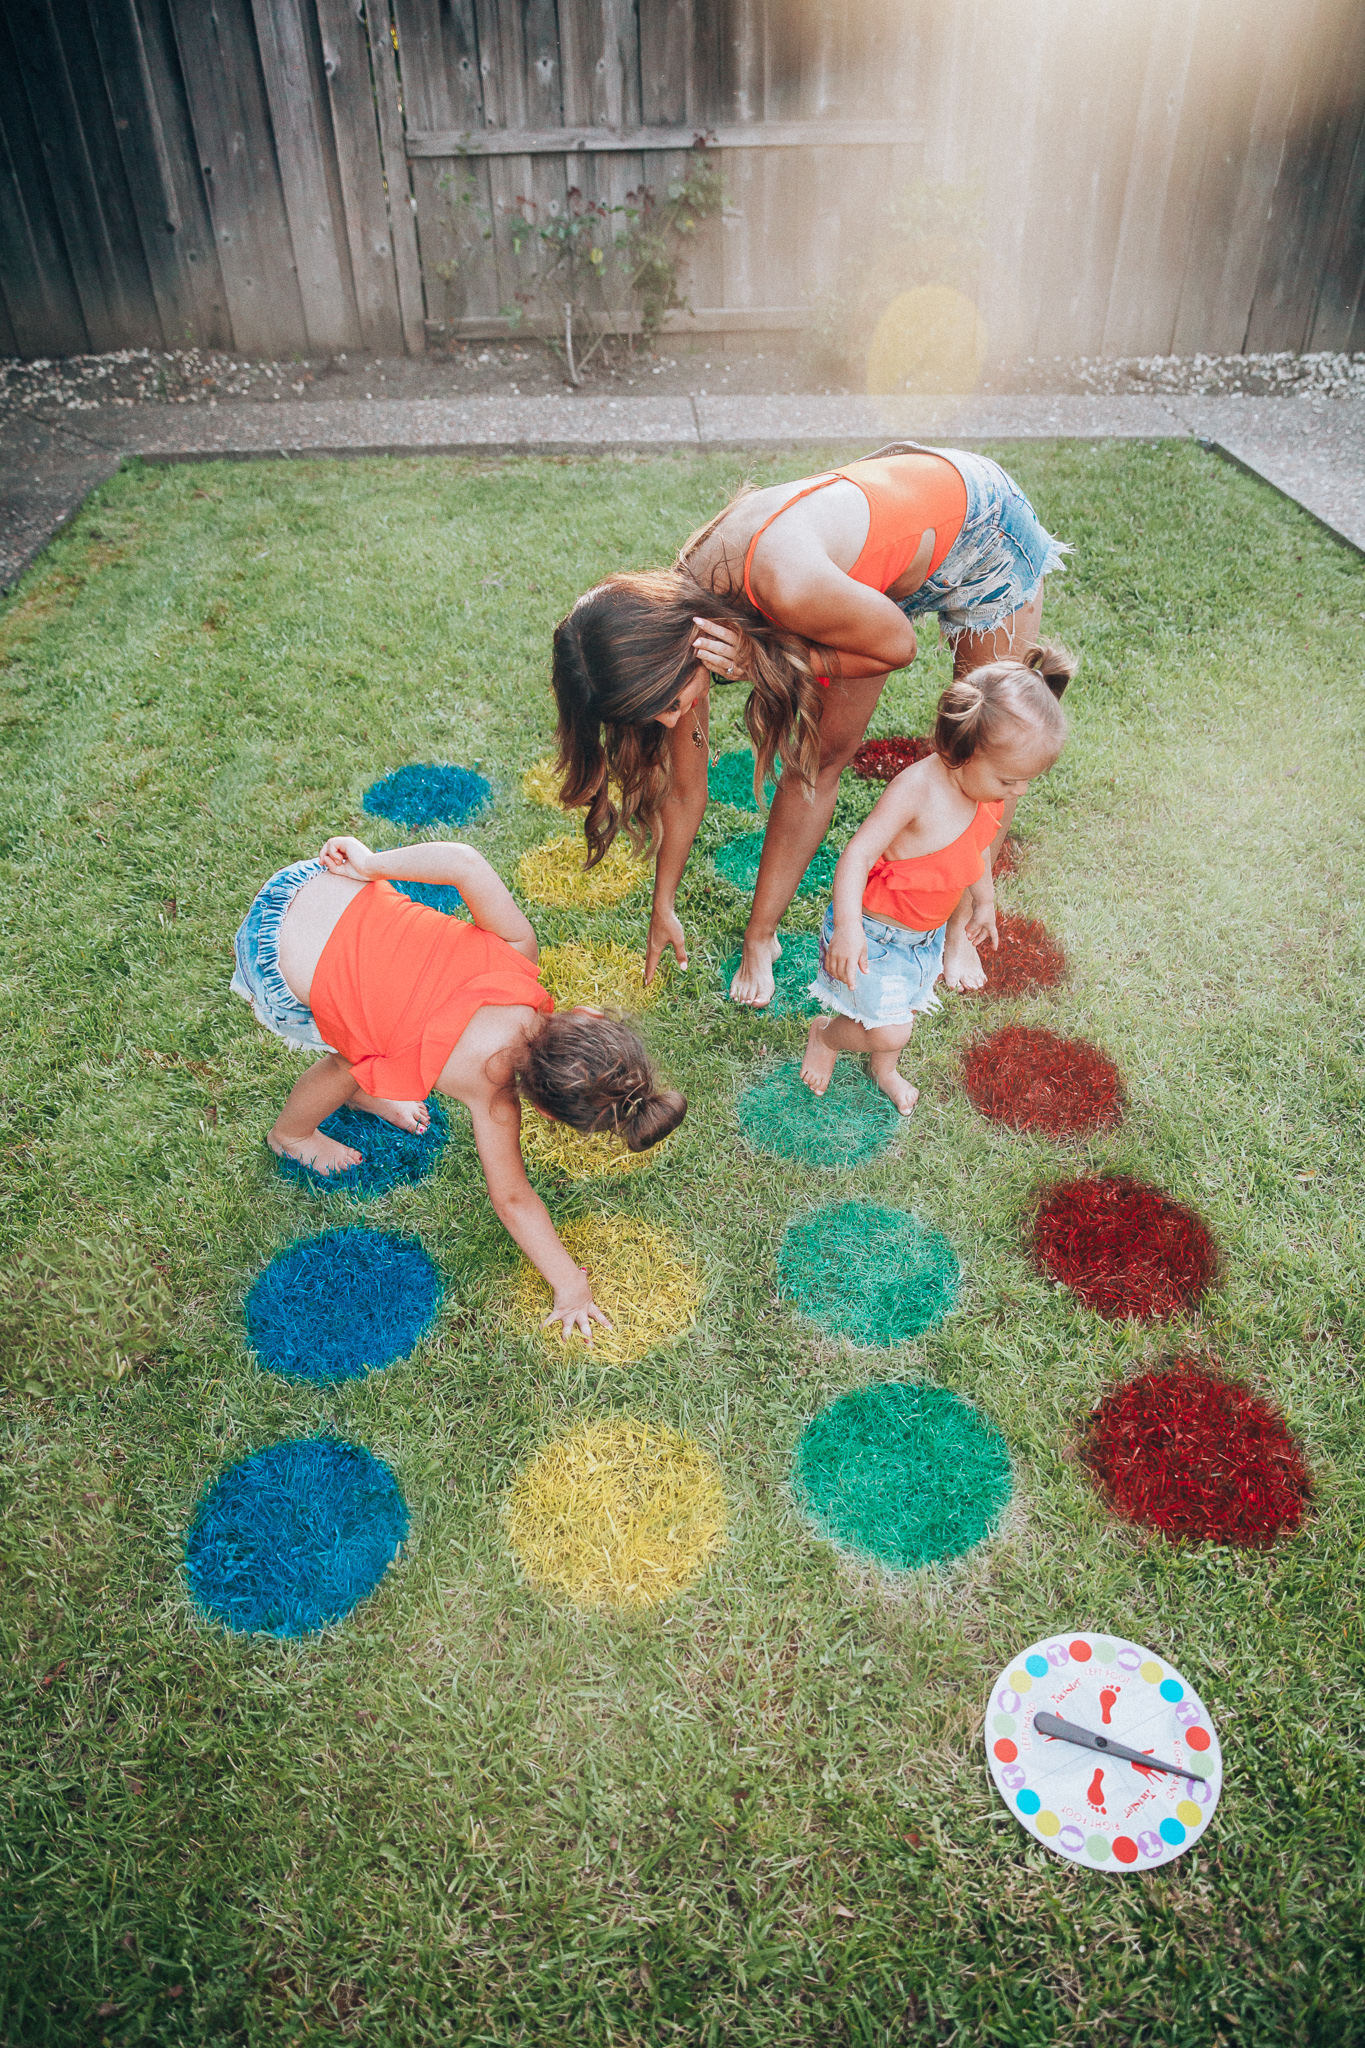 The Girl in the Yellow Dress | Latisha Springer | Fun Summer Activities for Kids by top US mom blog, The Girl in the Yellow Dress: image of mom, young kids, backyard, grass, cutoff shorts, red swimming suit tops, and twister game.